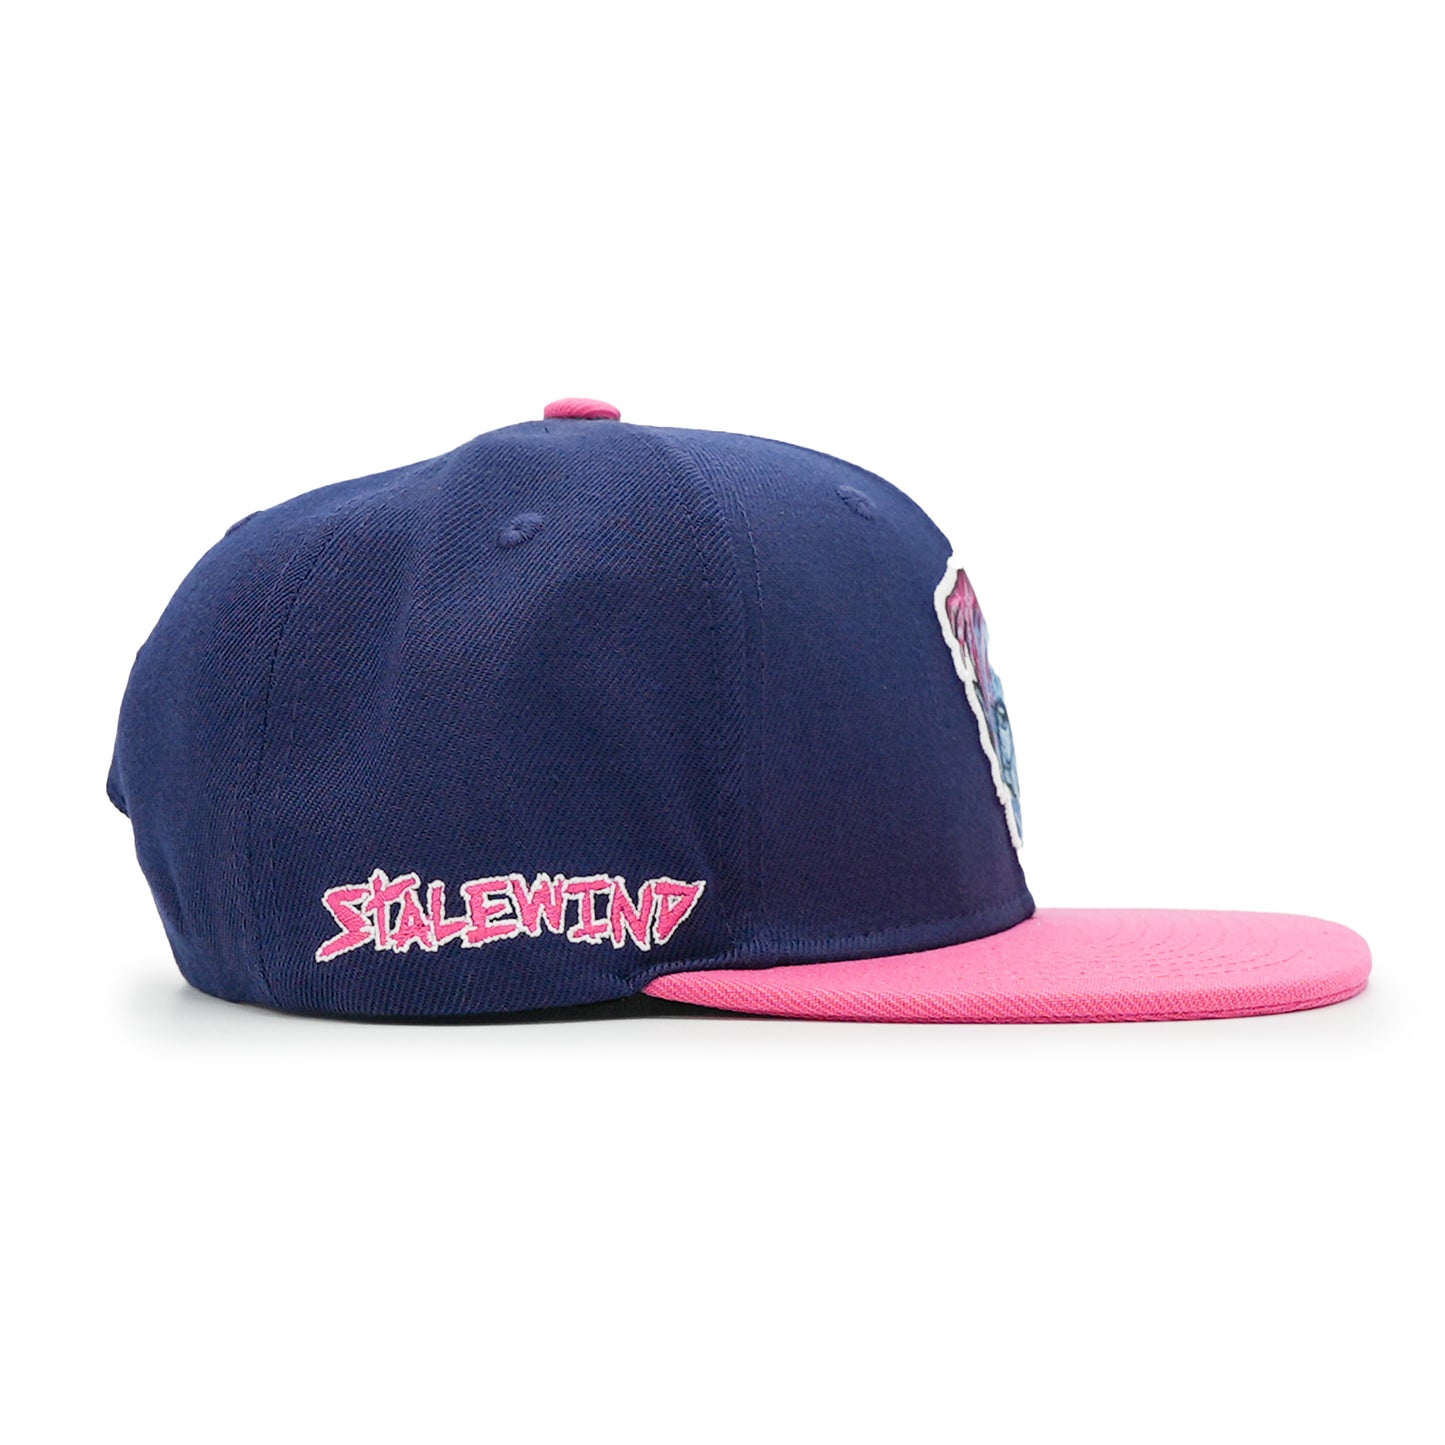 Elements Snapback - Stalewind - Navy and Pink